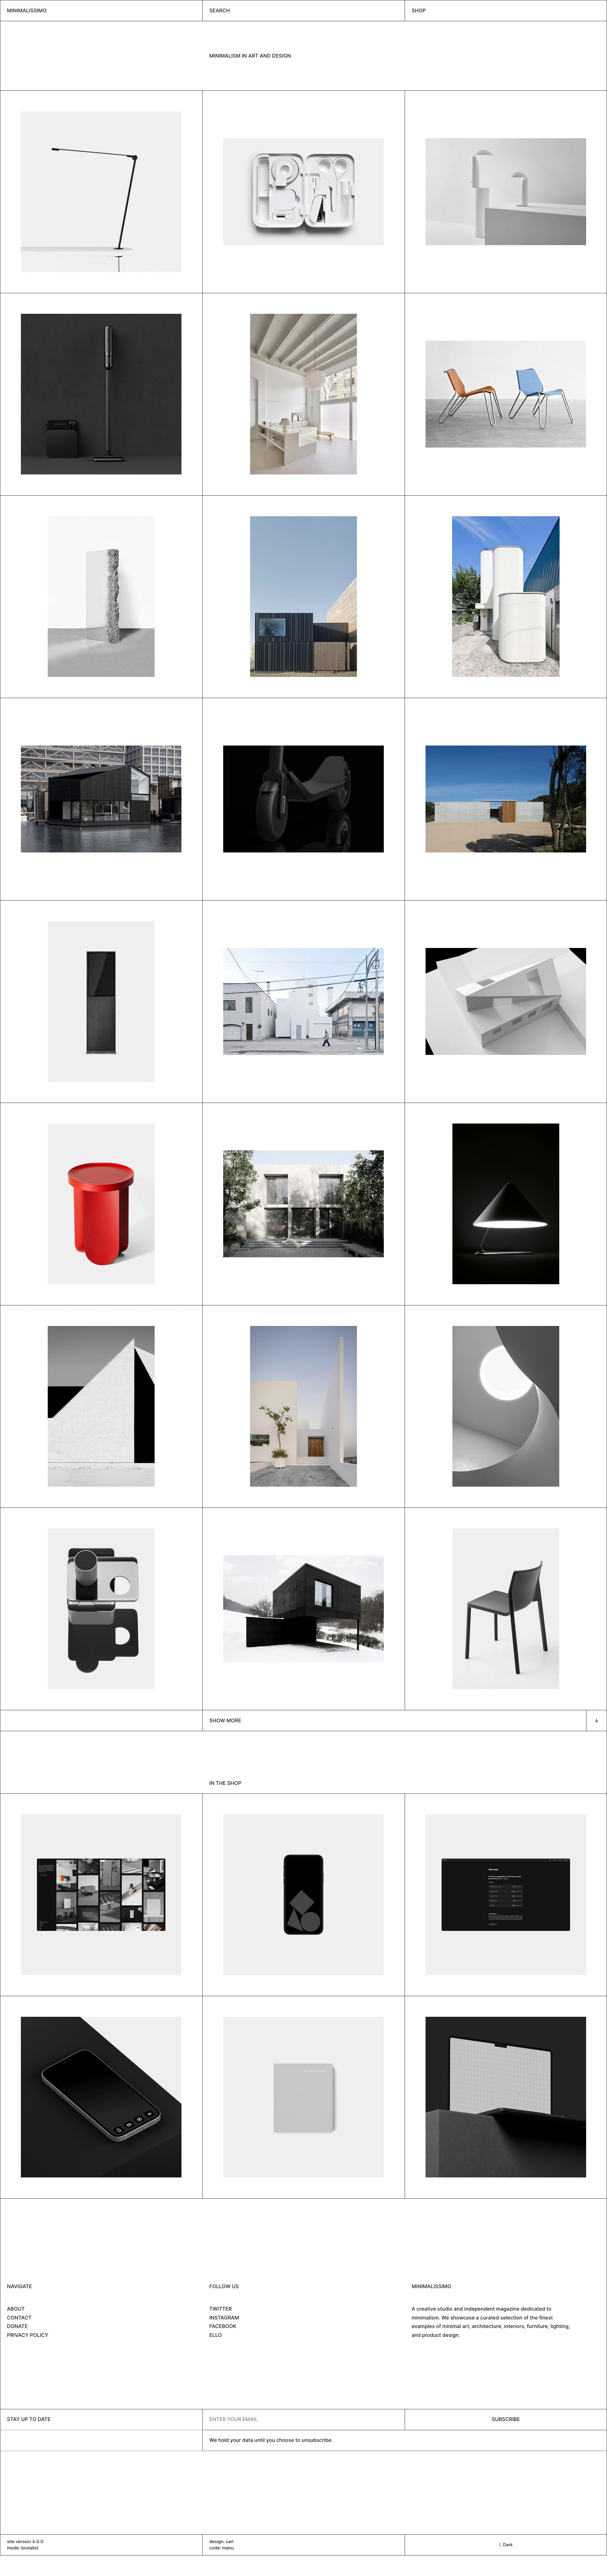 Minimalissimo Landing Page Example: A creative studio and independent magazine dedicated to minimalism. We showcase a curated selection of the finest examples of minimal art, architecture, interiors, furniture, lighting, and product design.